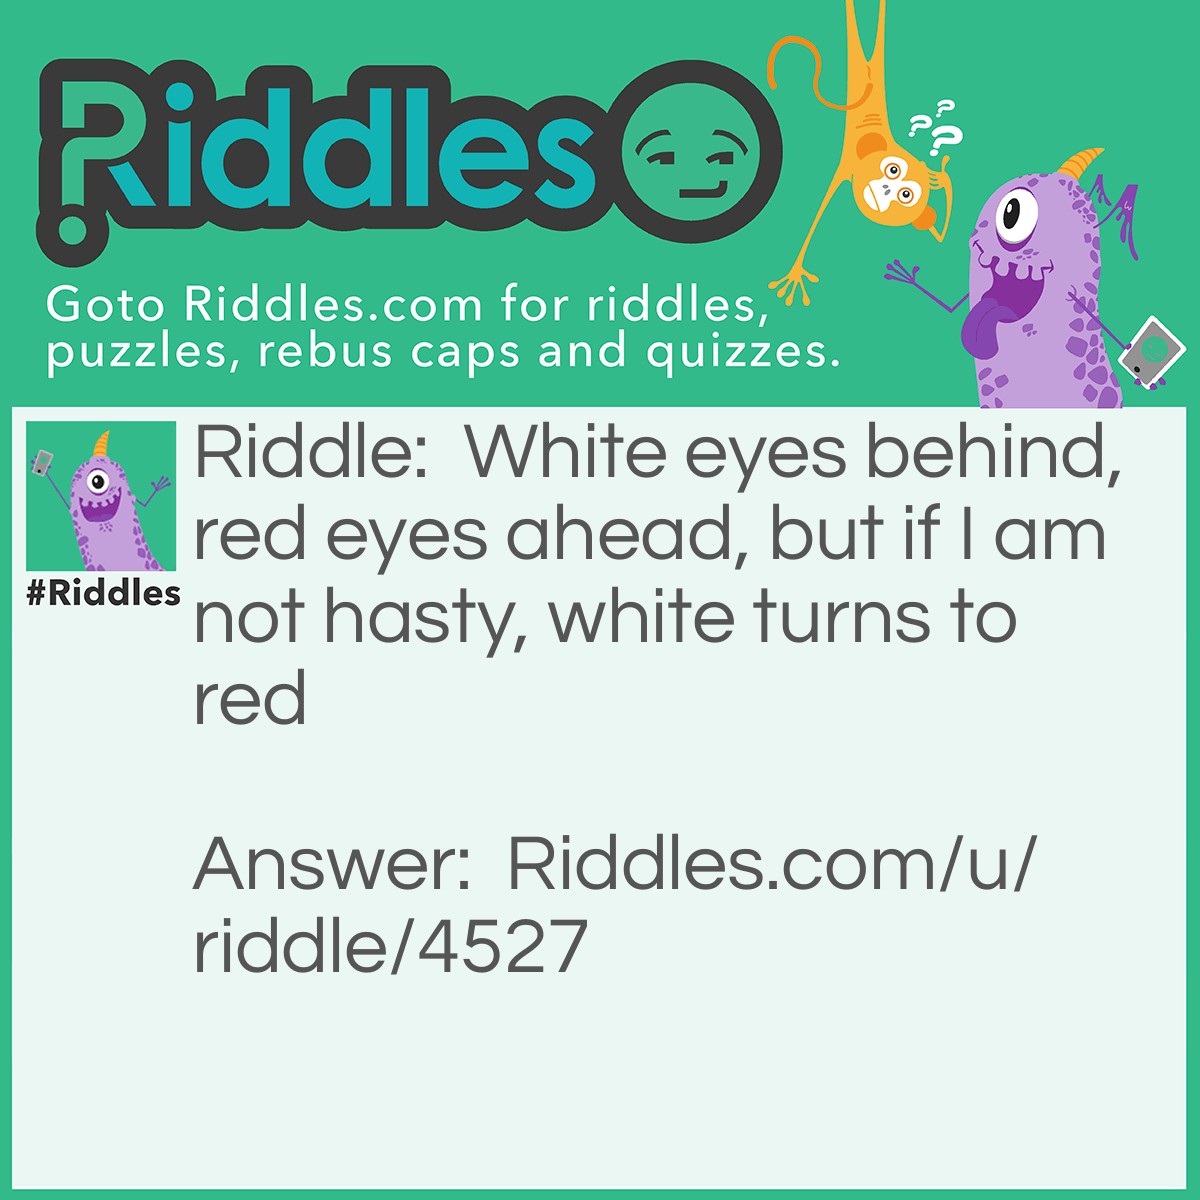 Riddle: White eyes behind, red eyes ahead, but if I am not hasty, white turns to red Answer: A car on a motorway ('Eyes' = headlights and tail lights).